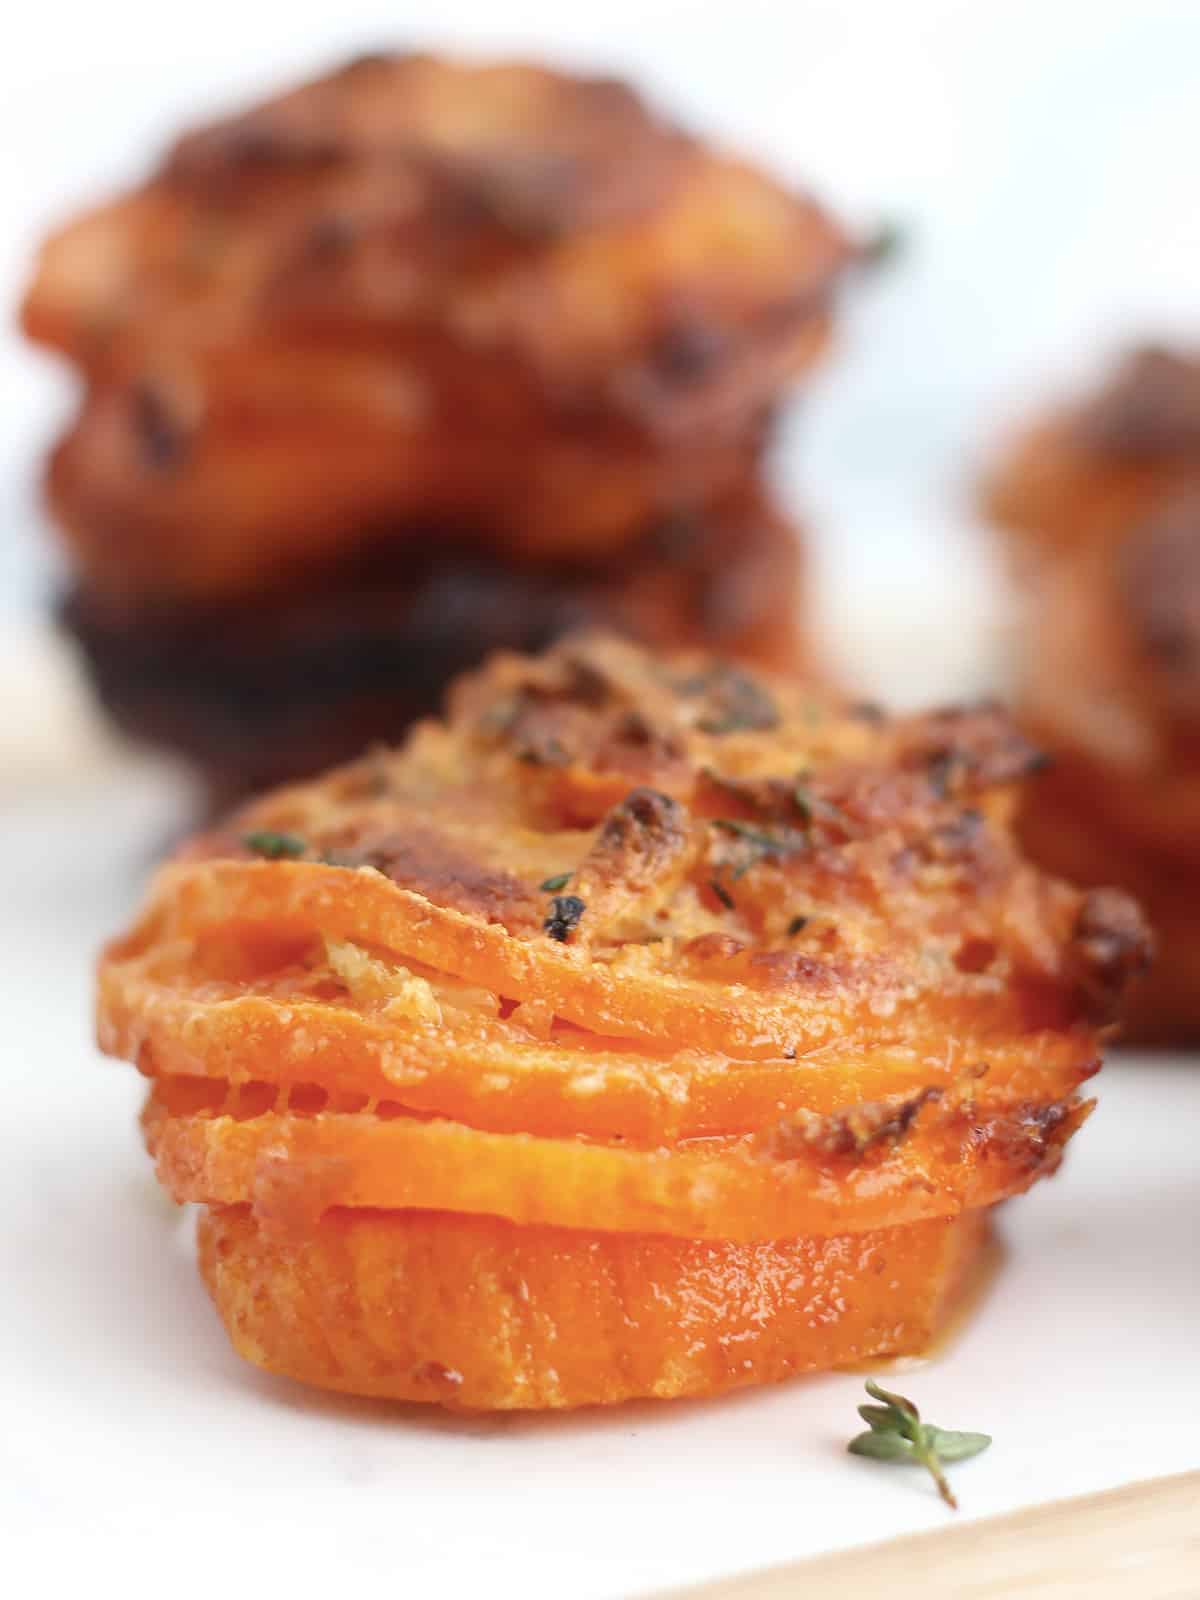 A baked sweet potato stack with four slices of sweet potato.